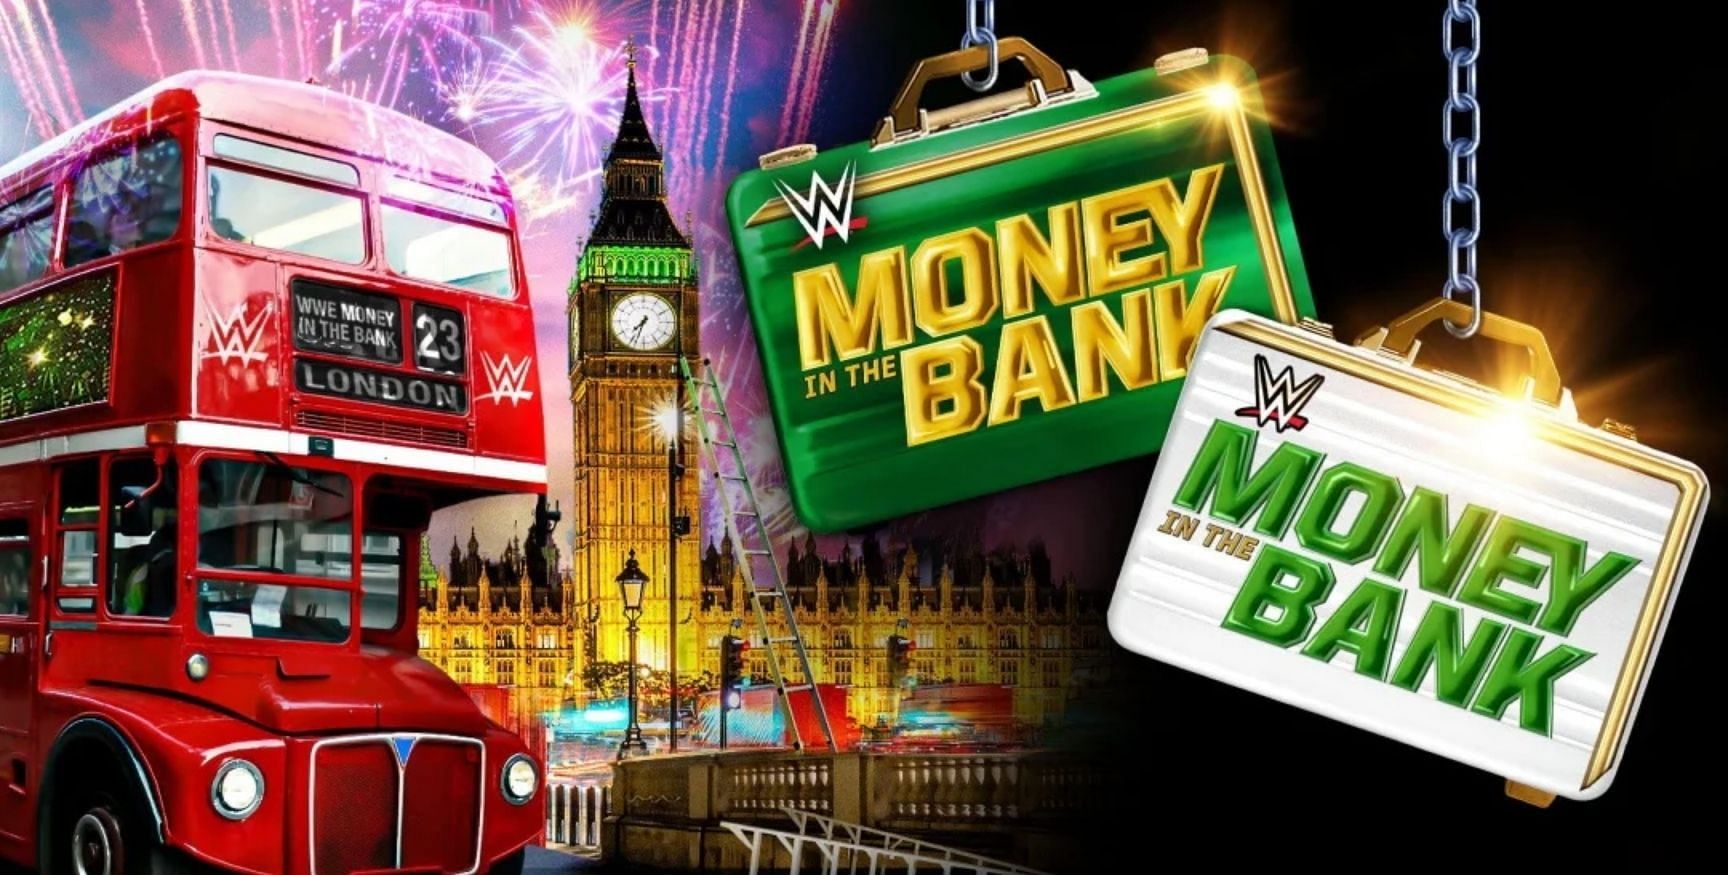 Money In The Bank is set to go down in London on July 1st.